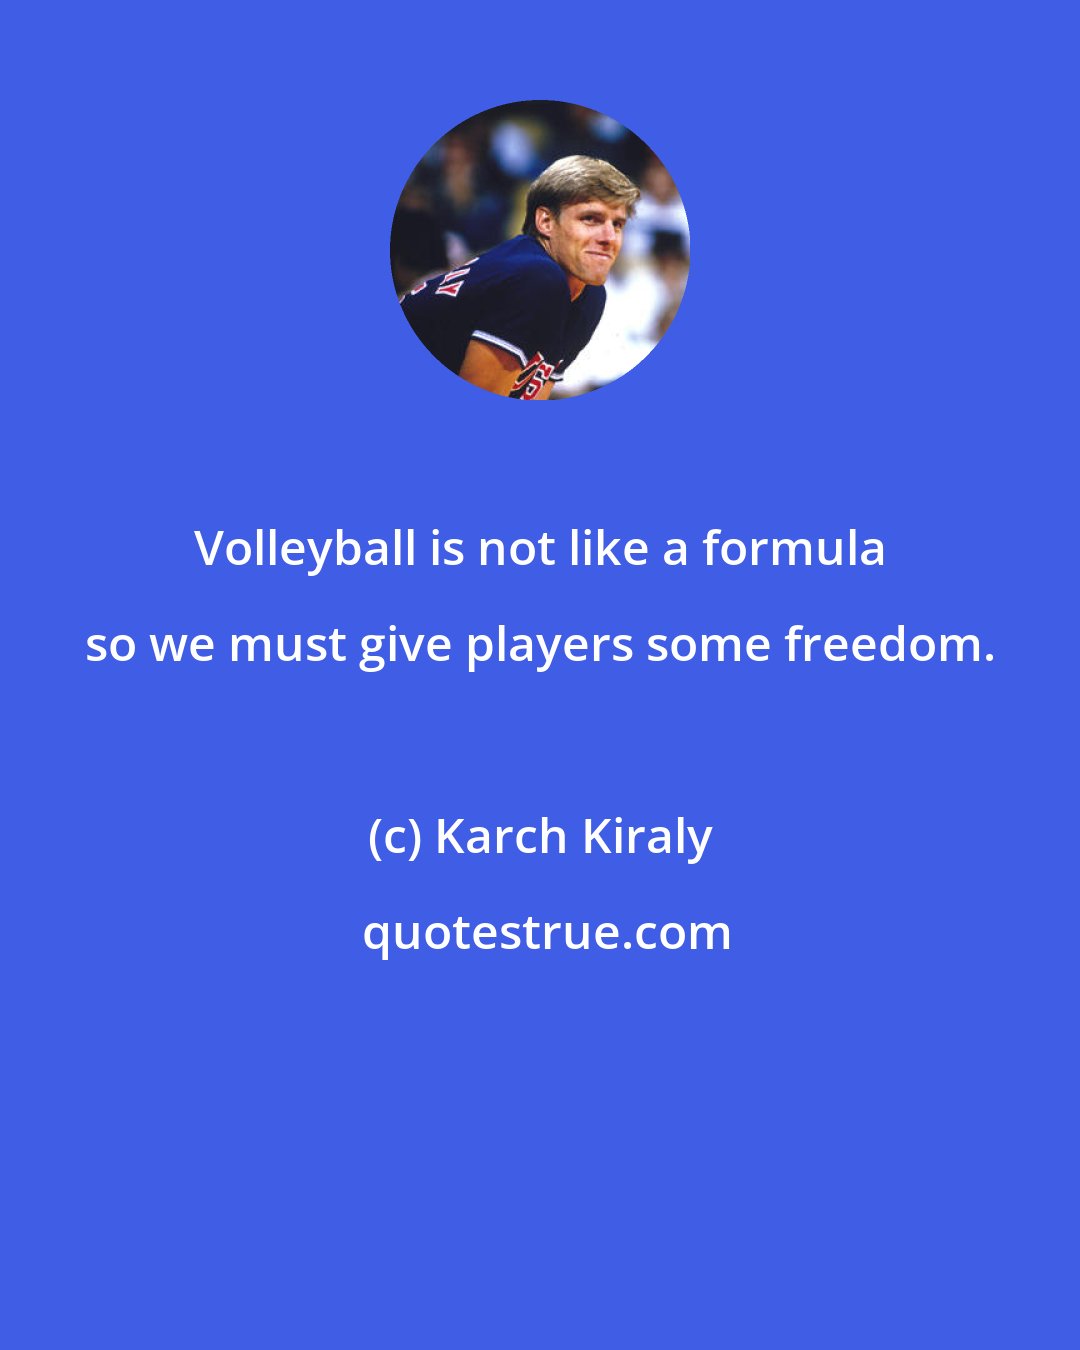 Karch Kiraly: Volleyball is not like a formula so we must give players some freedom.